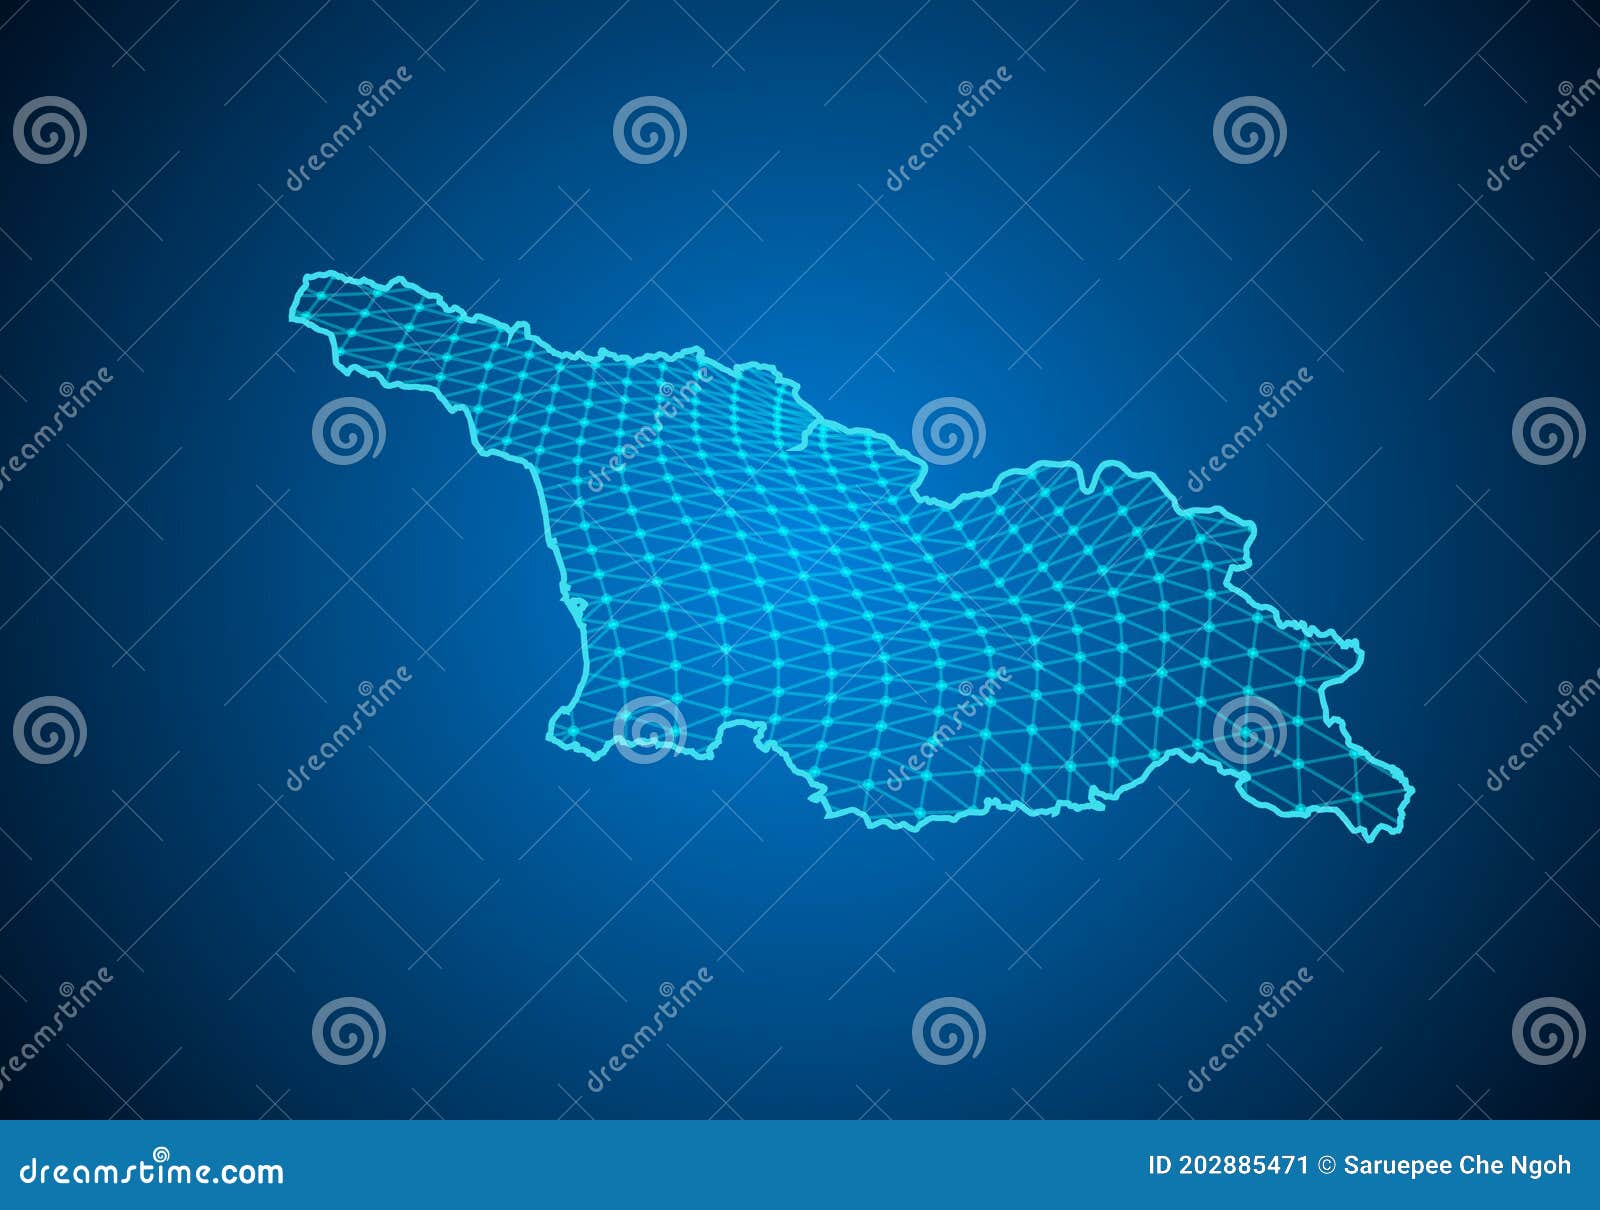 Georgia South Ossetia Map - High Detailed Black Map With Counties ...